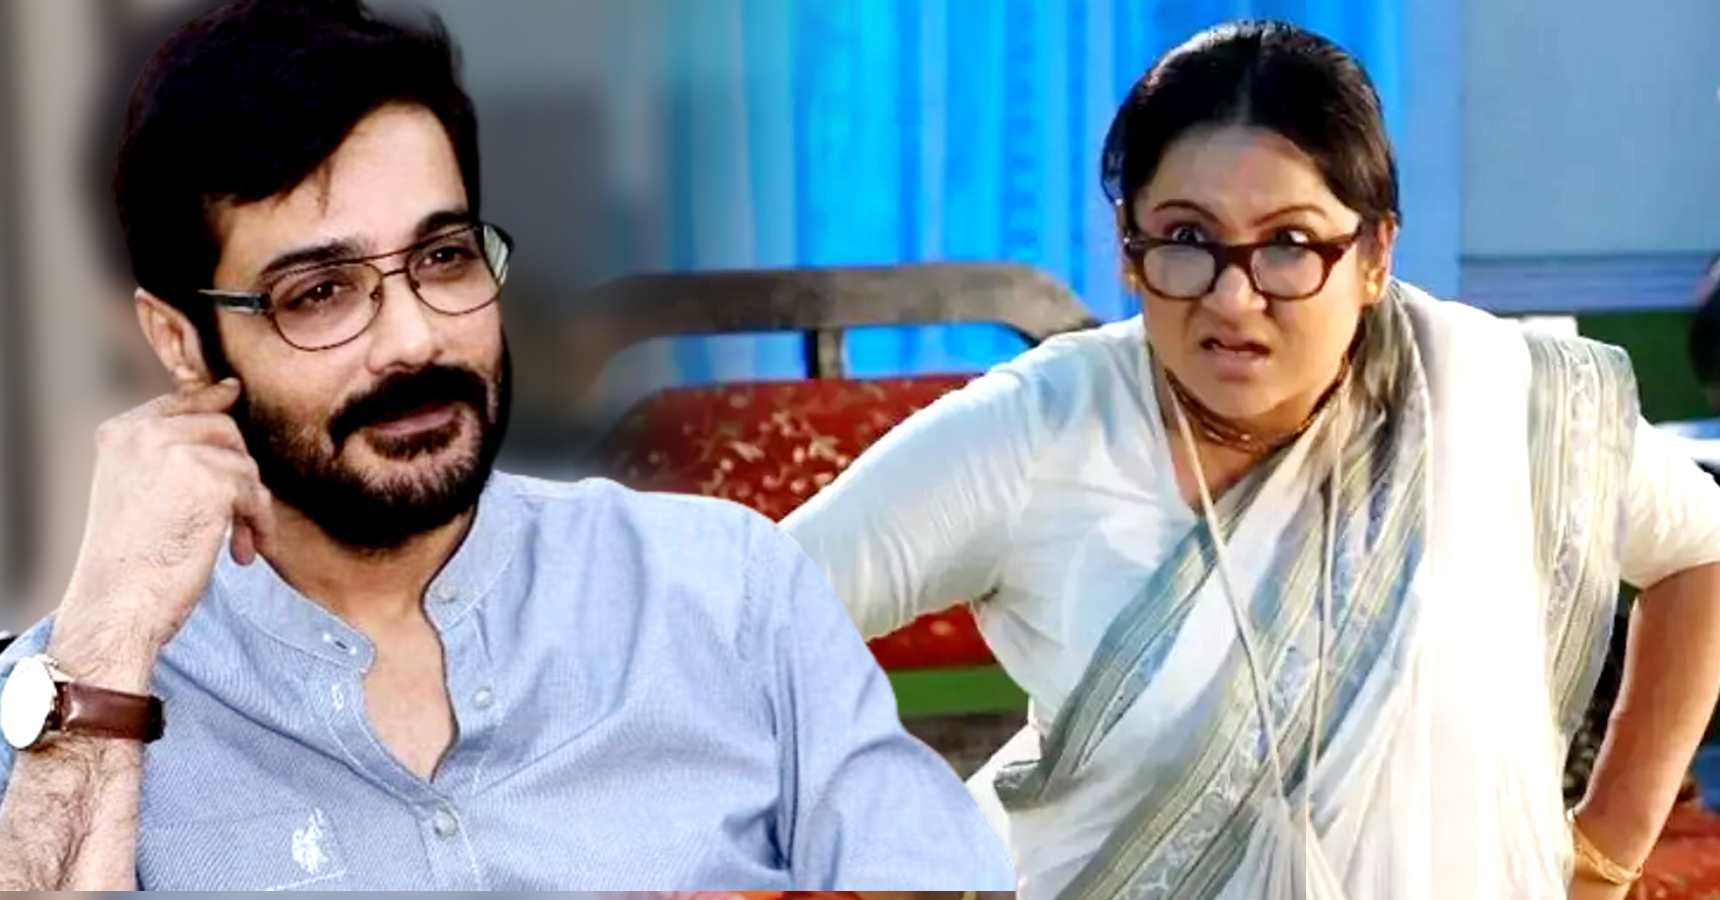 All you need to know about Prosenjit Chatterjee's heroine Moumita Chakraborty